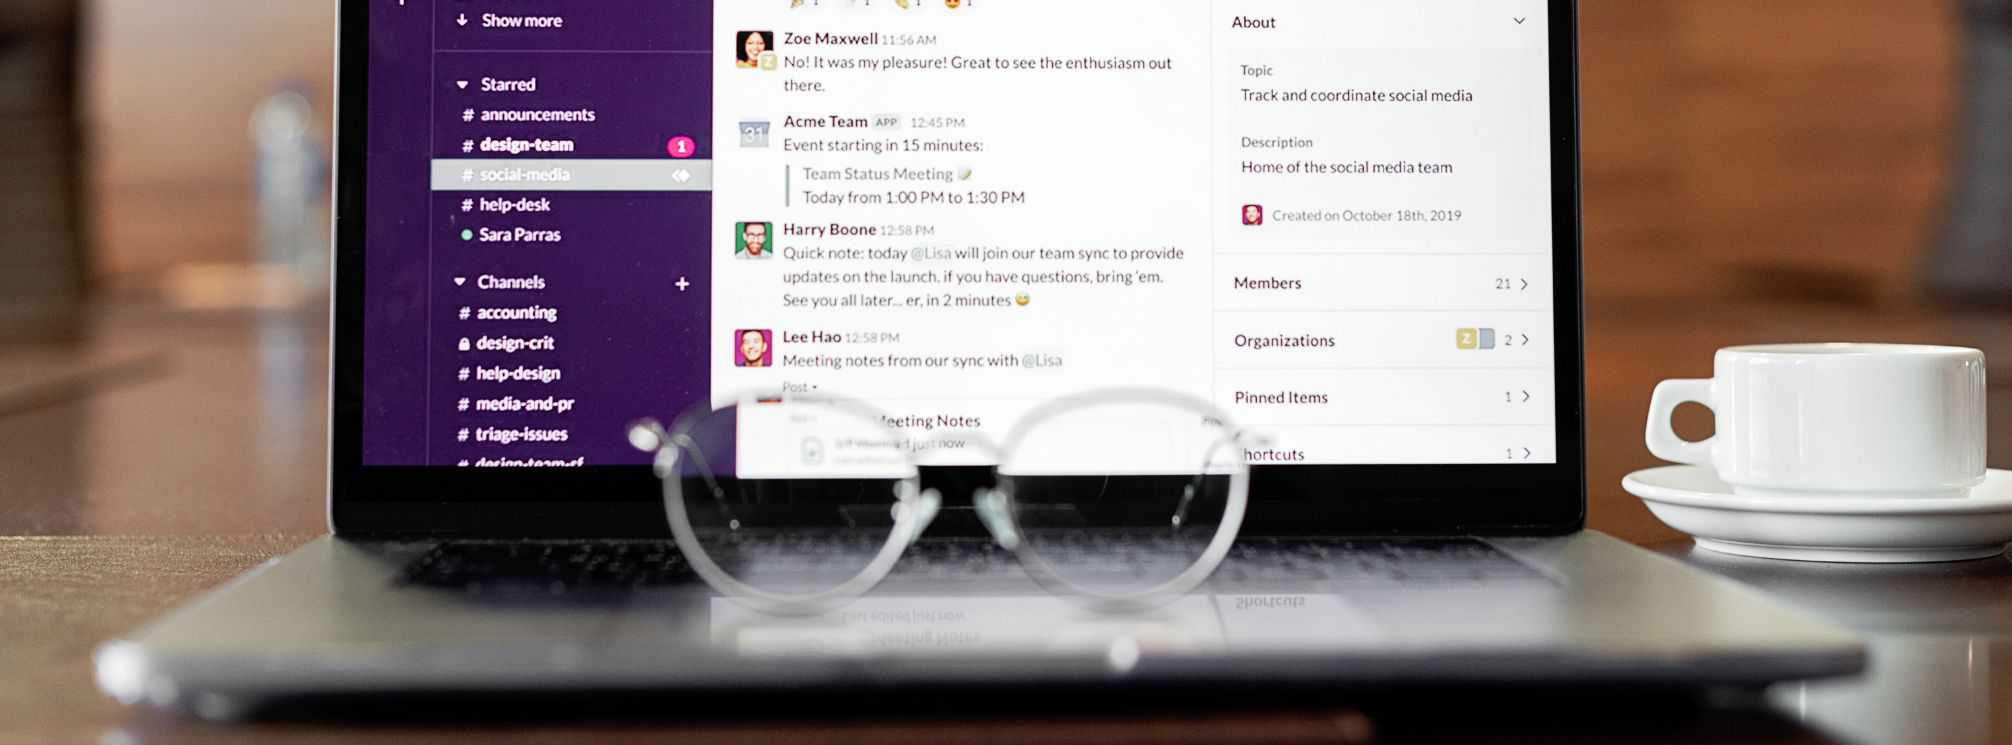 image of slack, a business collaboration tool, pulled up on someone's laptop